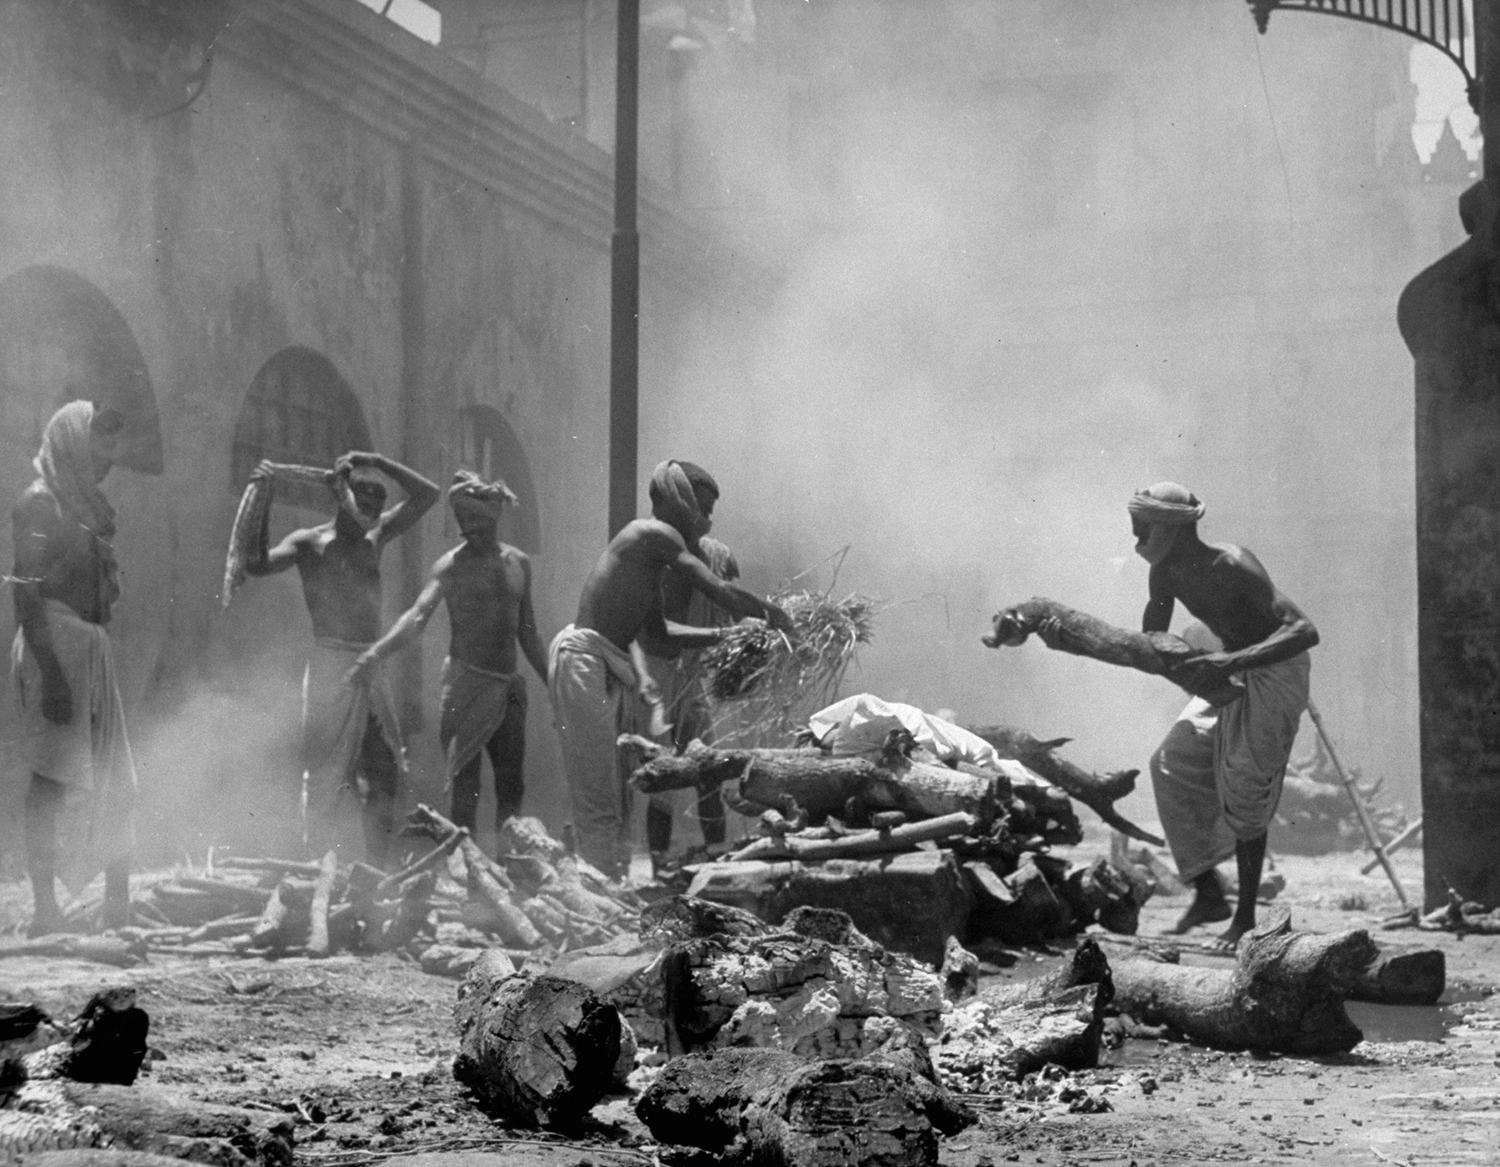 Men add wood and straw to funeral pyres in preparation for cremation of corpses after bloody rioting between Hindus and Muslims, Calcutta (now Kolkata), India, 1946.